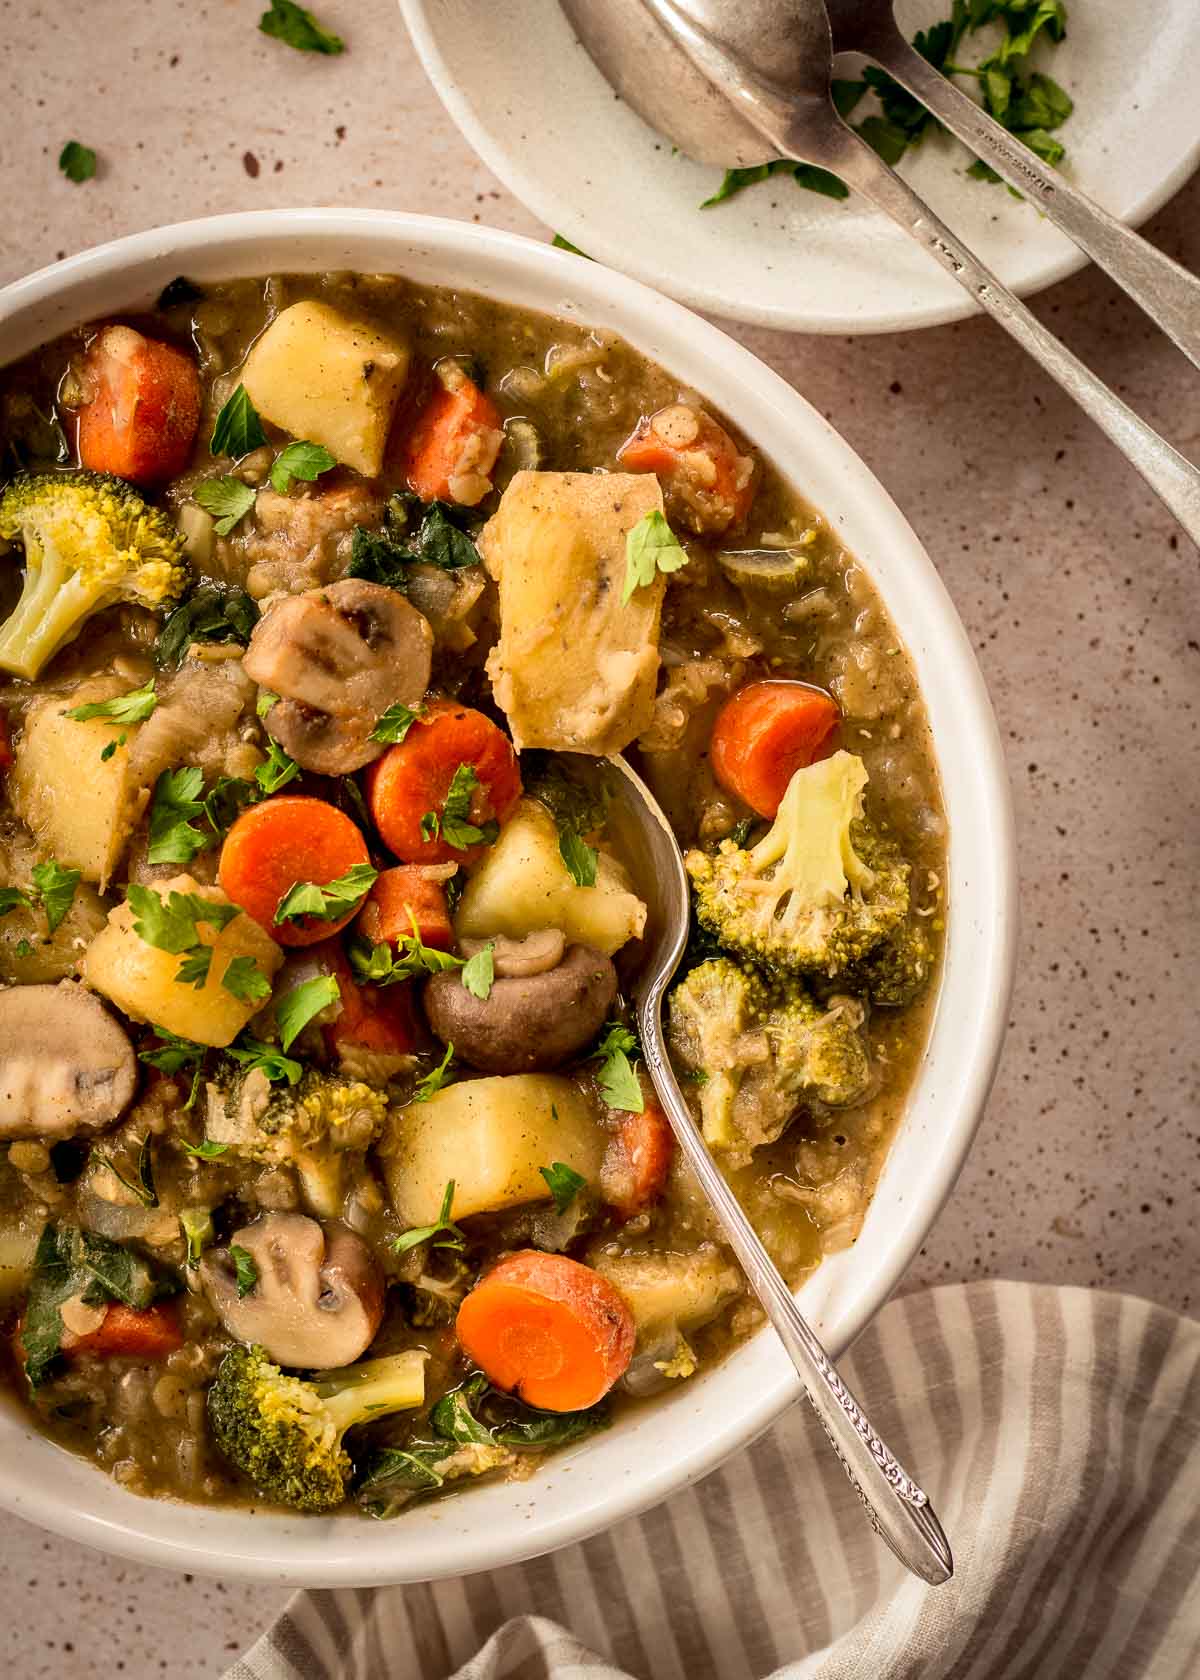 White bowl of easy vegetable stew with carrots, mushrooms, broccoli and lentils. A spoon is in the bowl and there are others nearby on a plate.